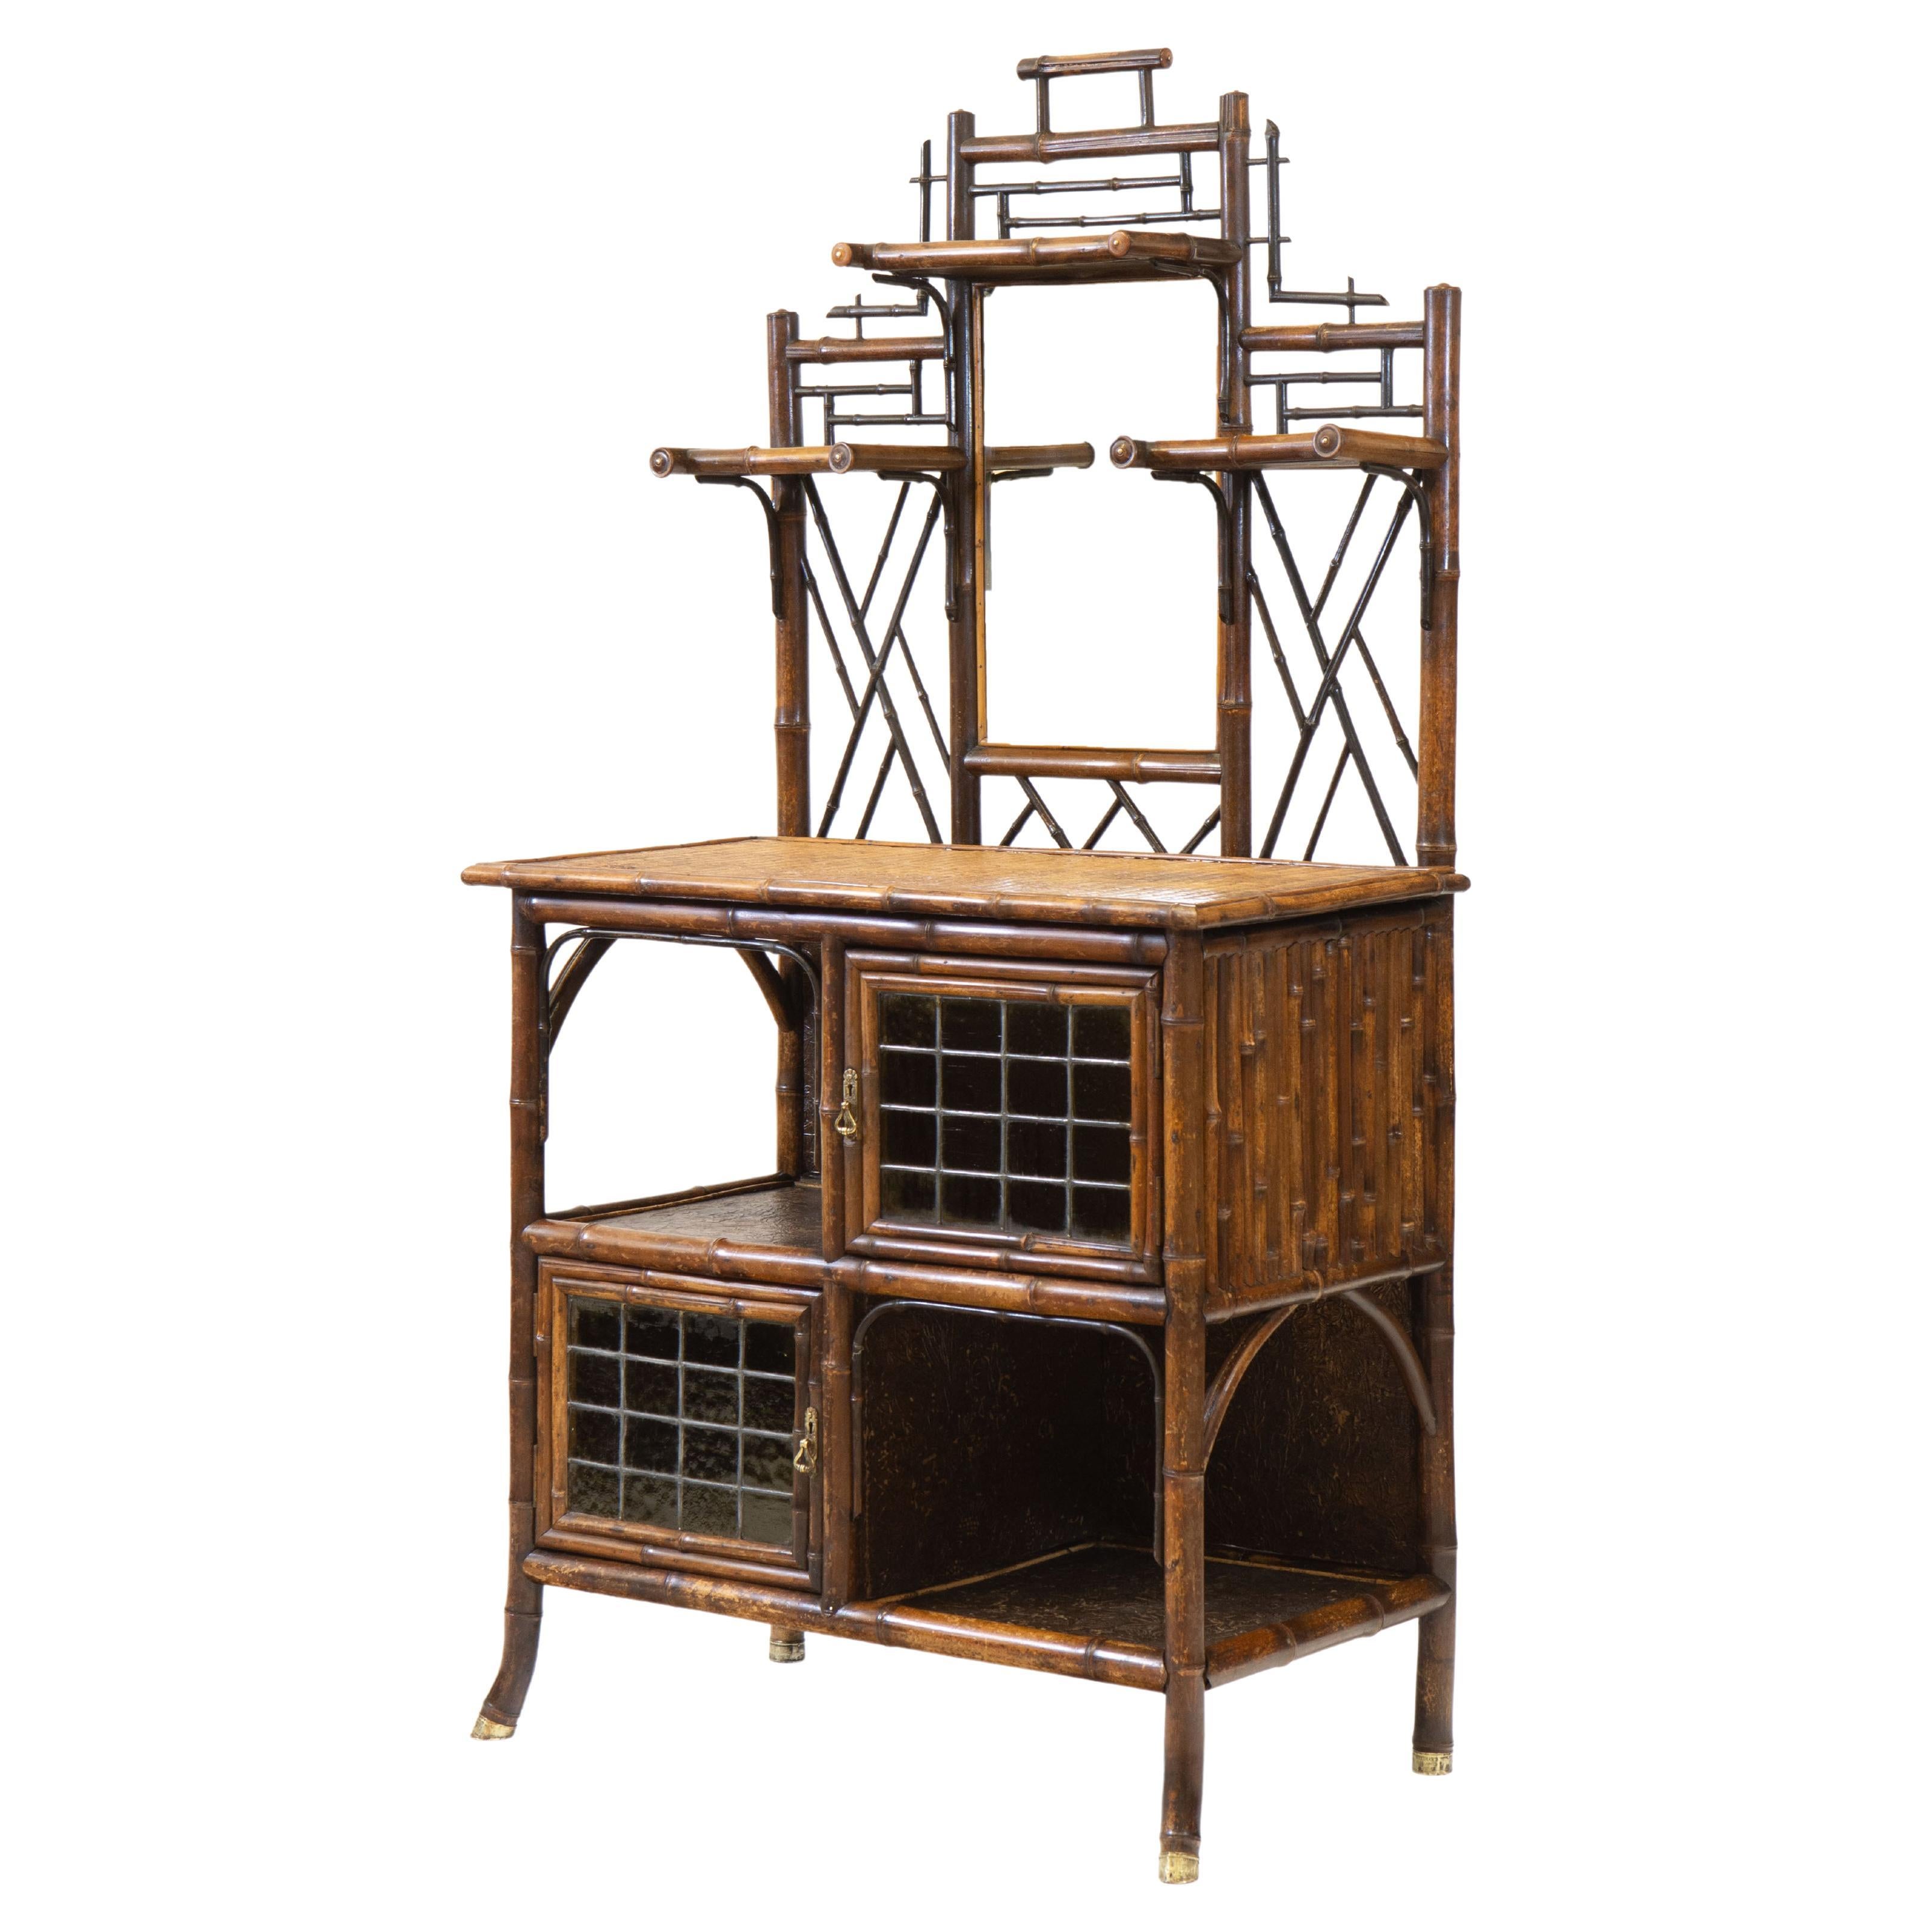 Late 19th Century, English Bamboo Etagere Leaded Stained Glass Cabinet